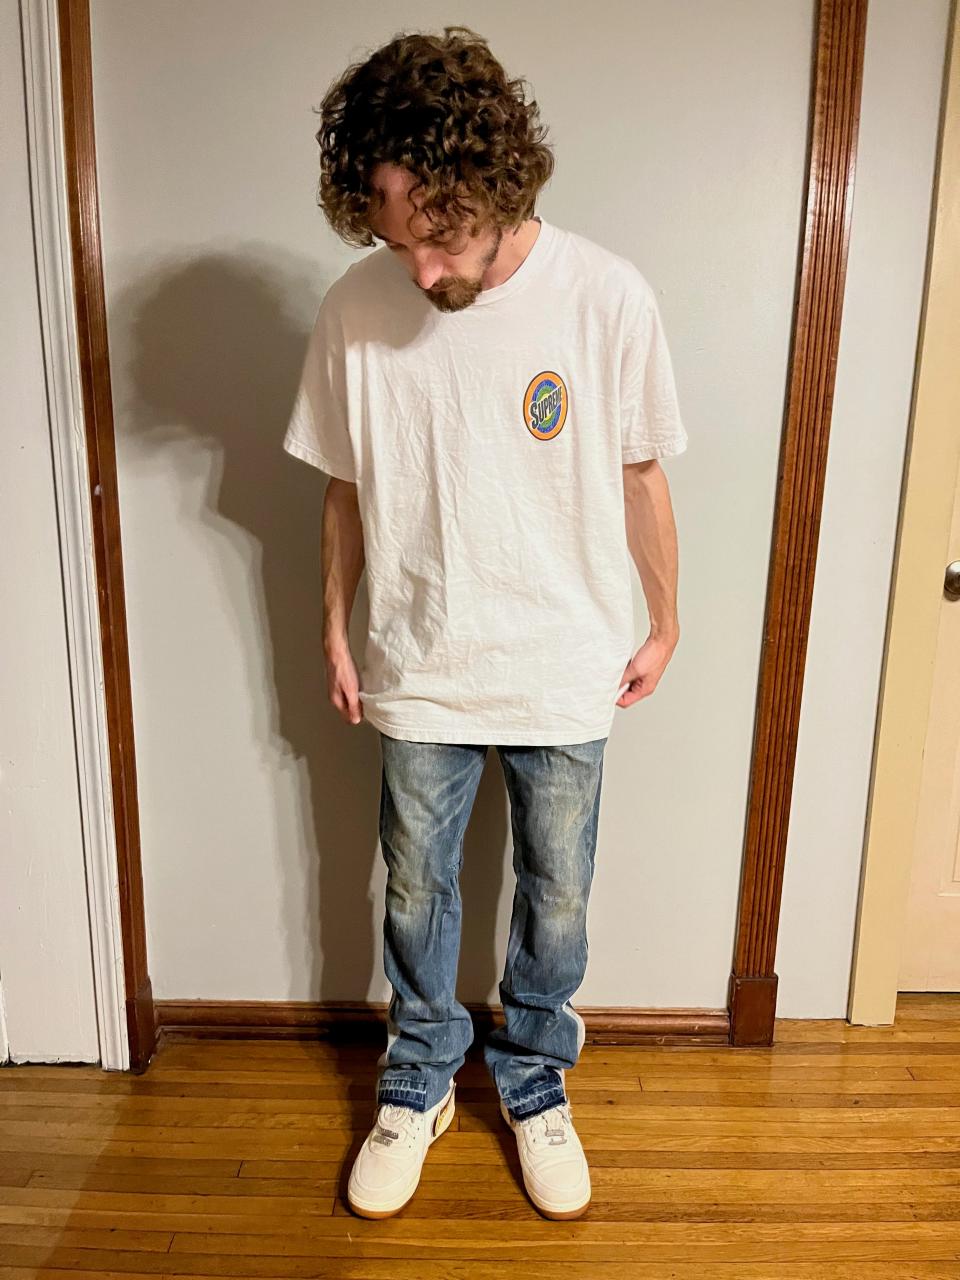 Trevor Rapoport wearing his customized denim jeans, button-down shirt and brown pants. People interested in learning to upcycle their own clothing can take a fashion course, attend local art store classes or even watch videos on YouTube.